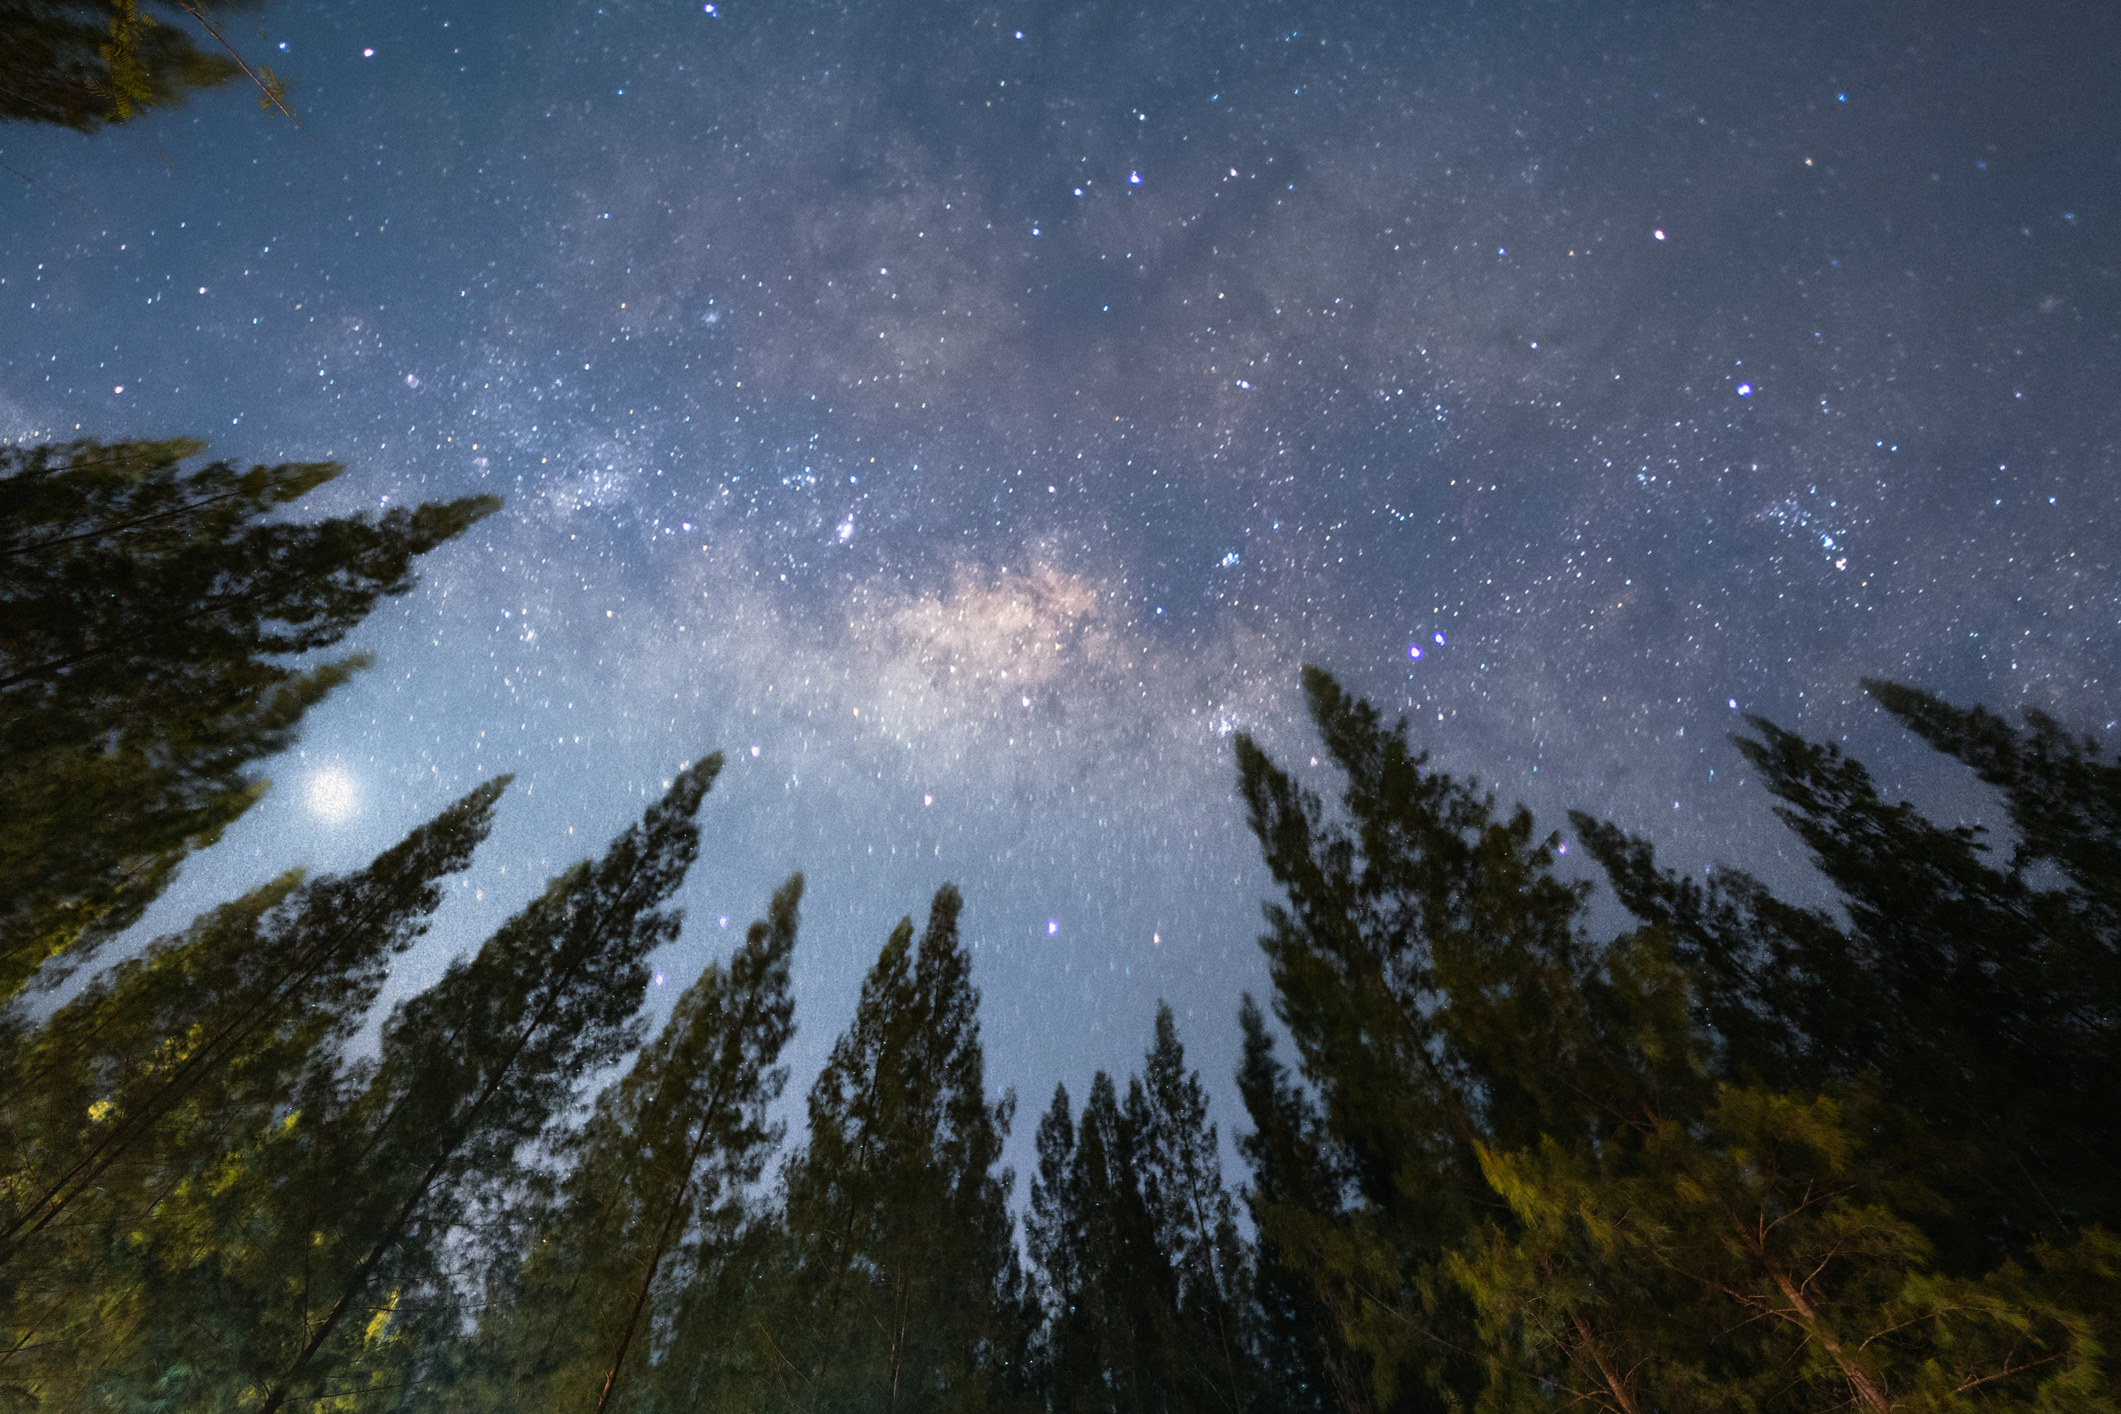 The Milky Way galaxy above trees